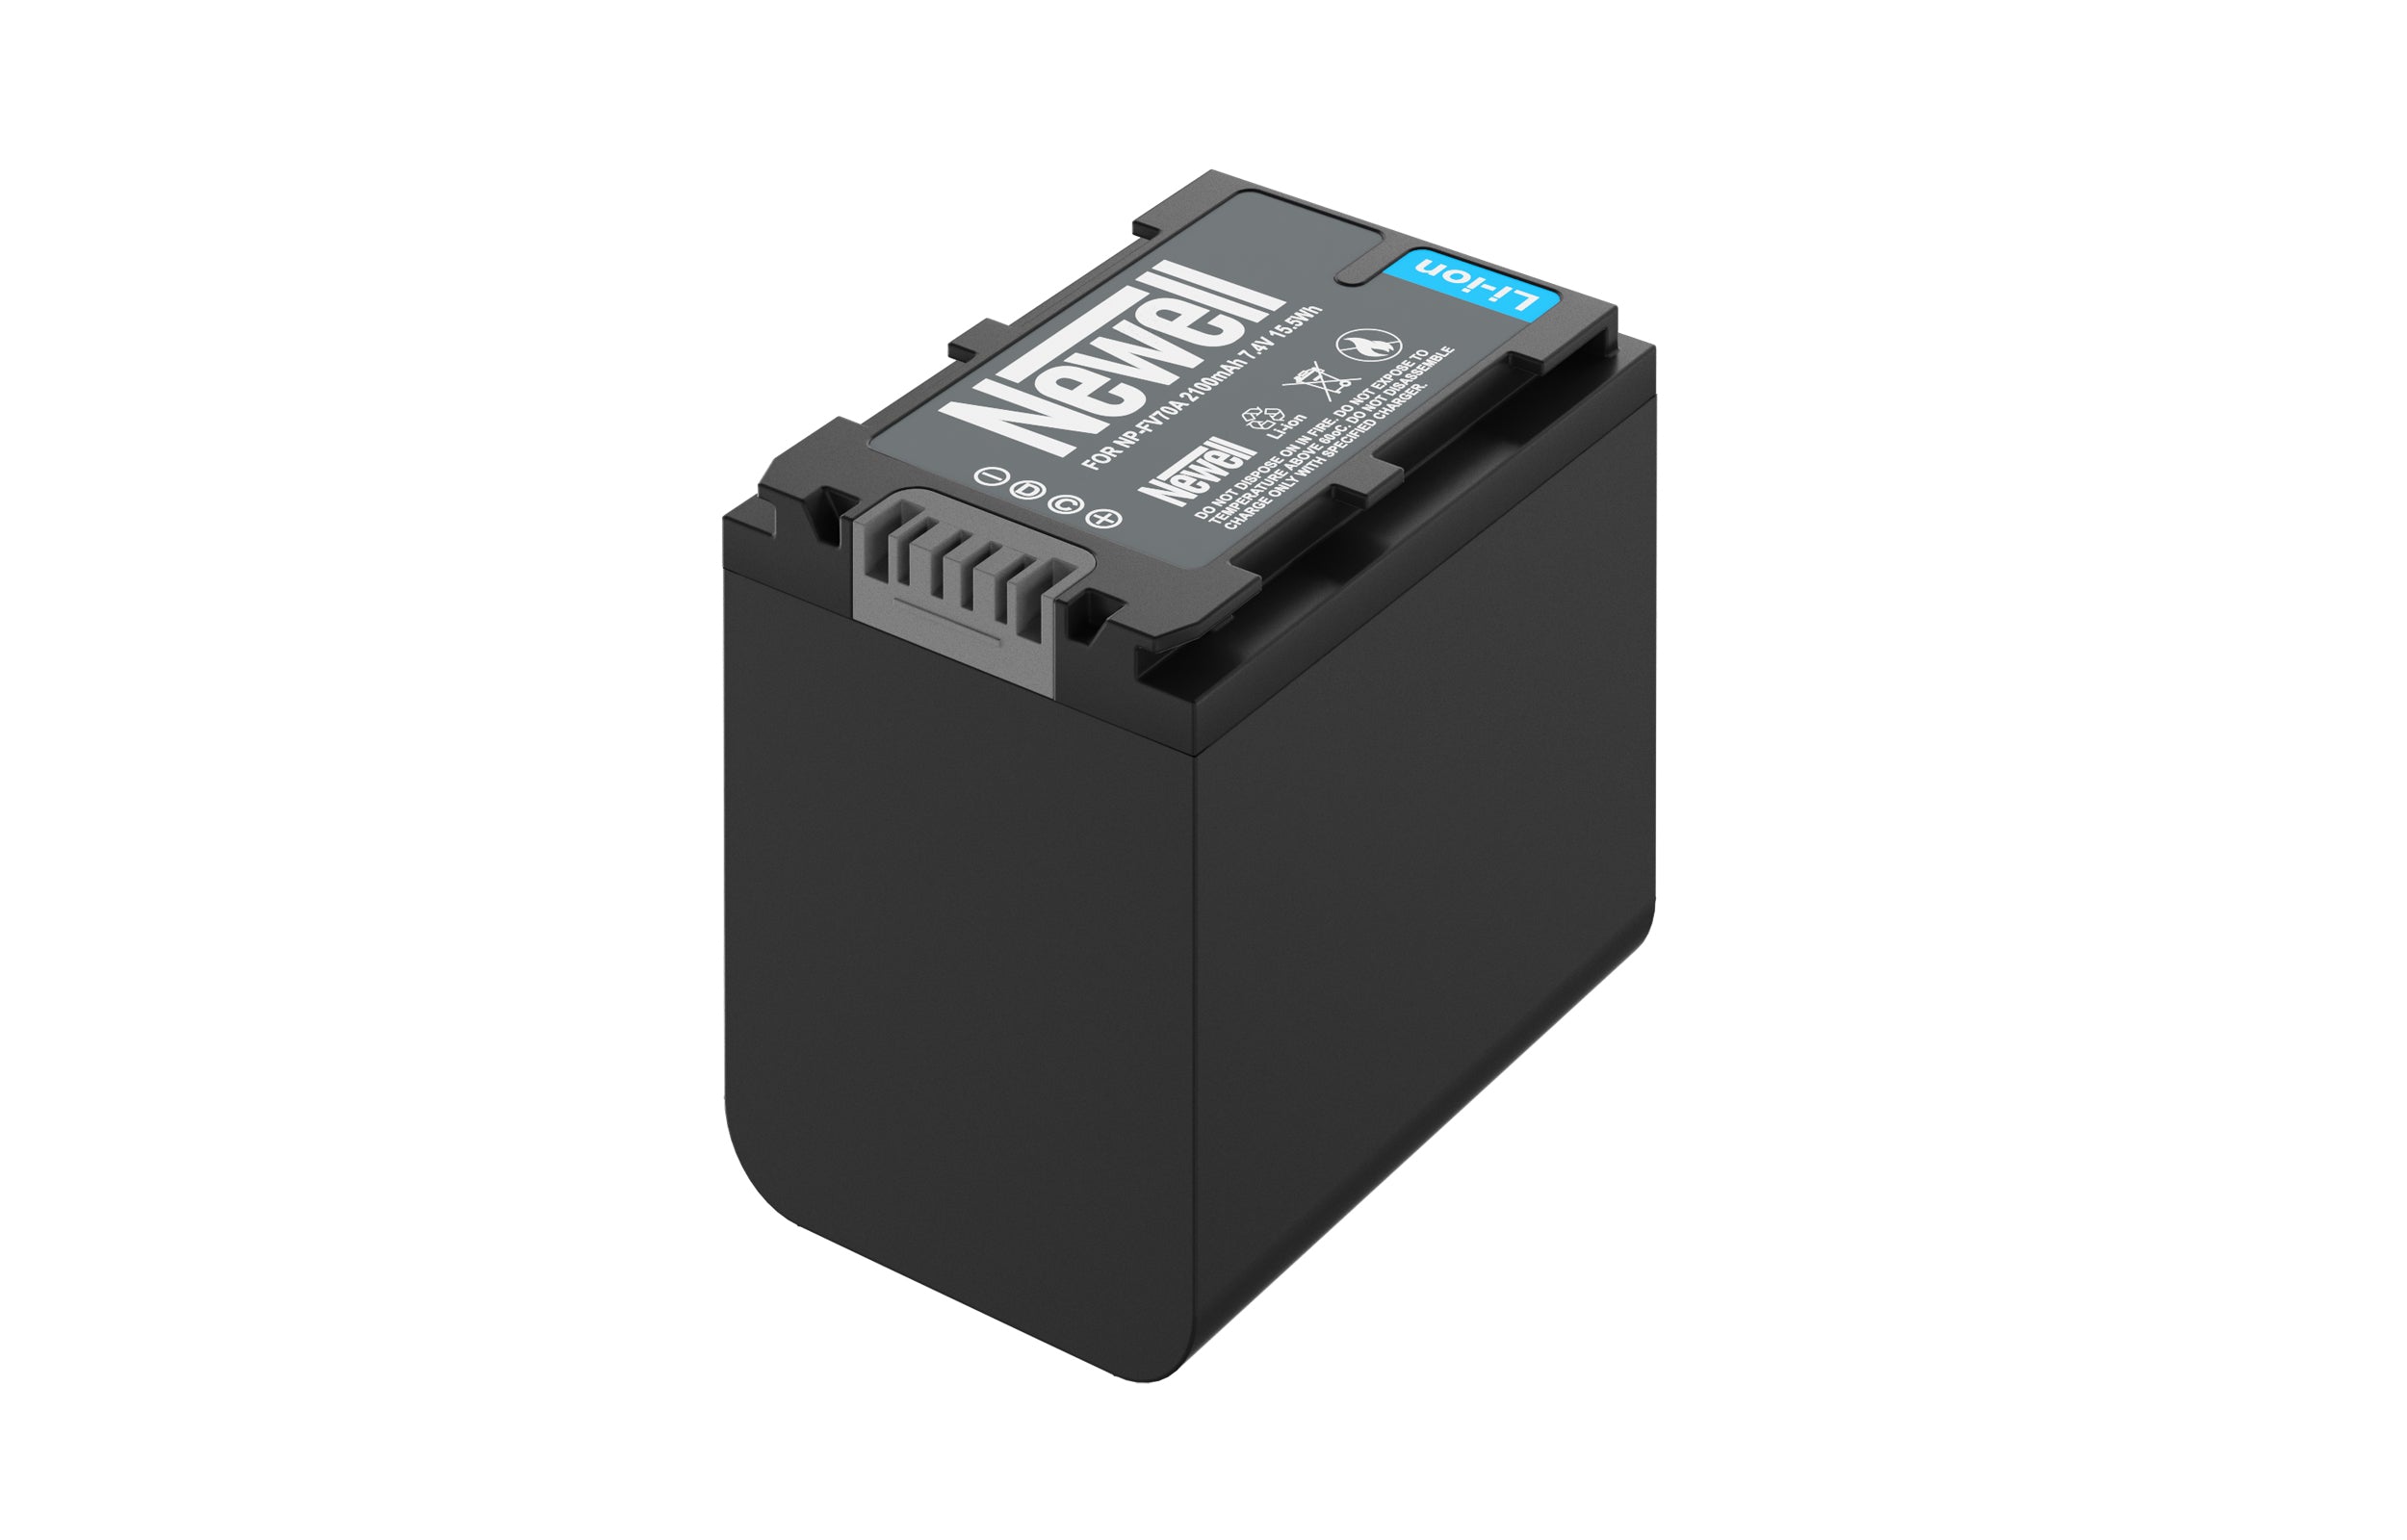 Newell rechargeable battery NP-FV70A